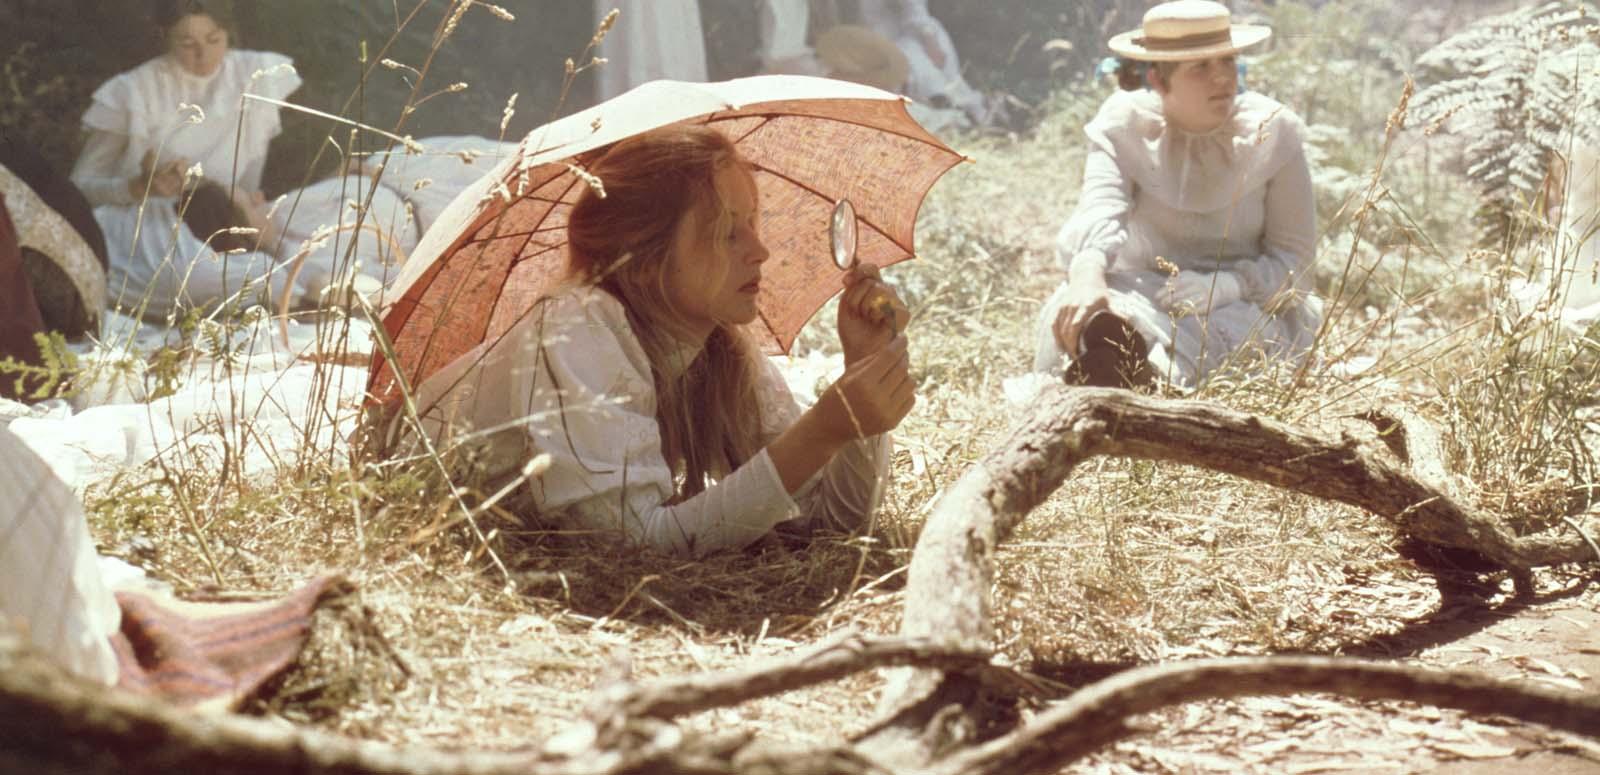 Miranda rests on the grass under a parasol and looks through a magnifying glass in a scene from the film Picnic at Hanging Rock